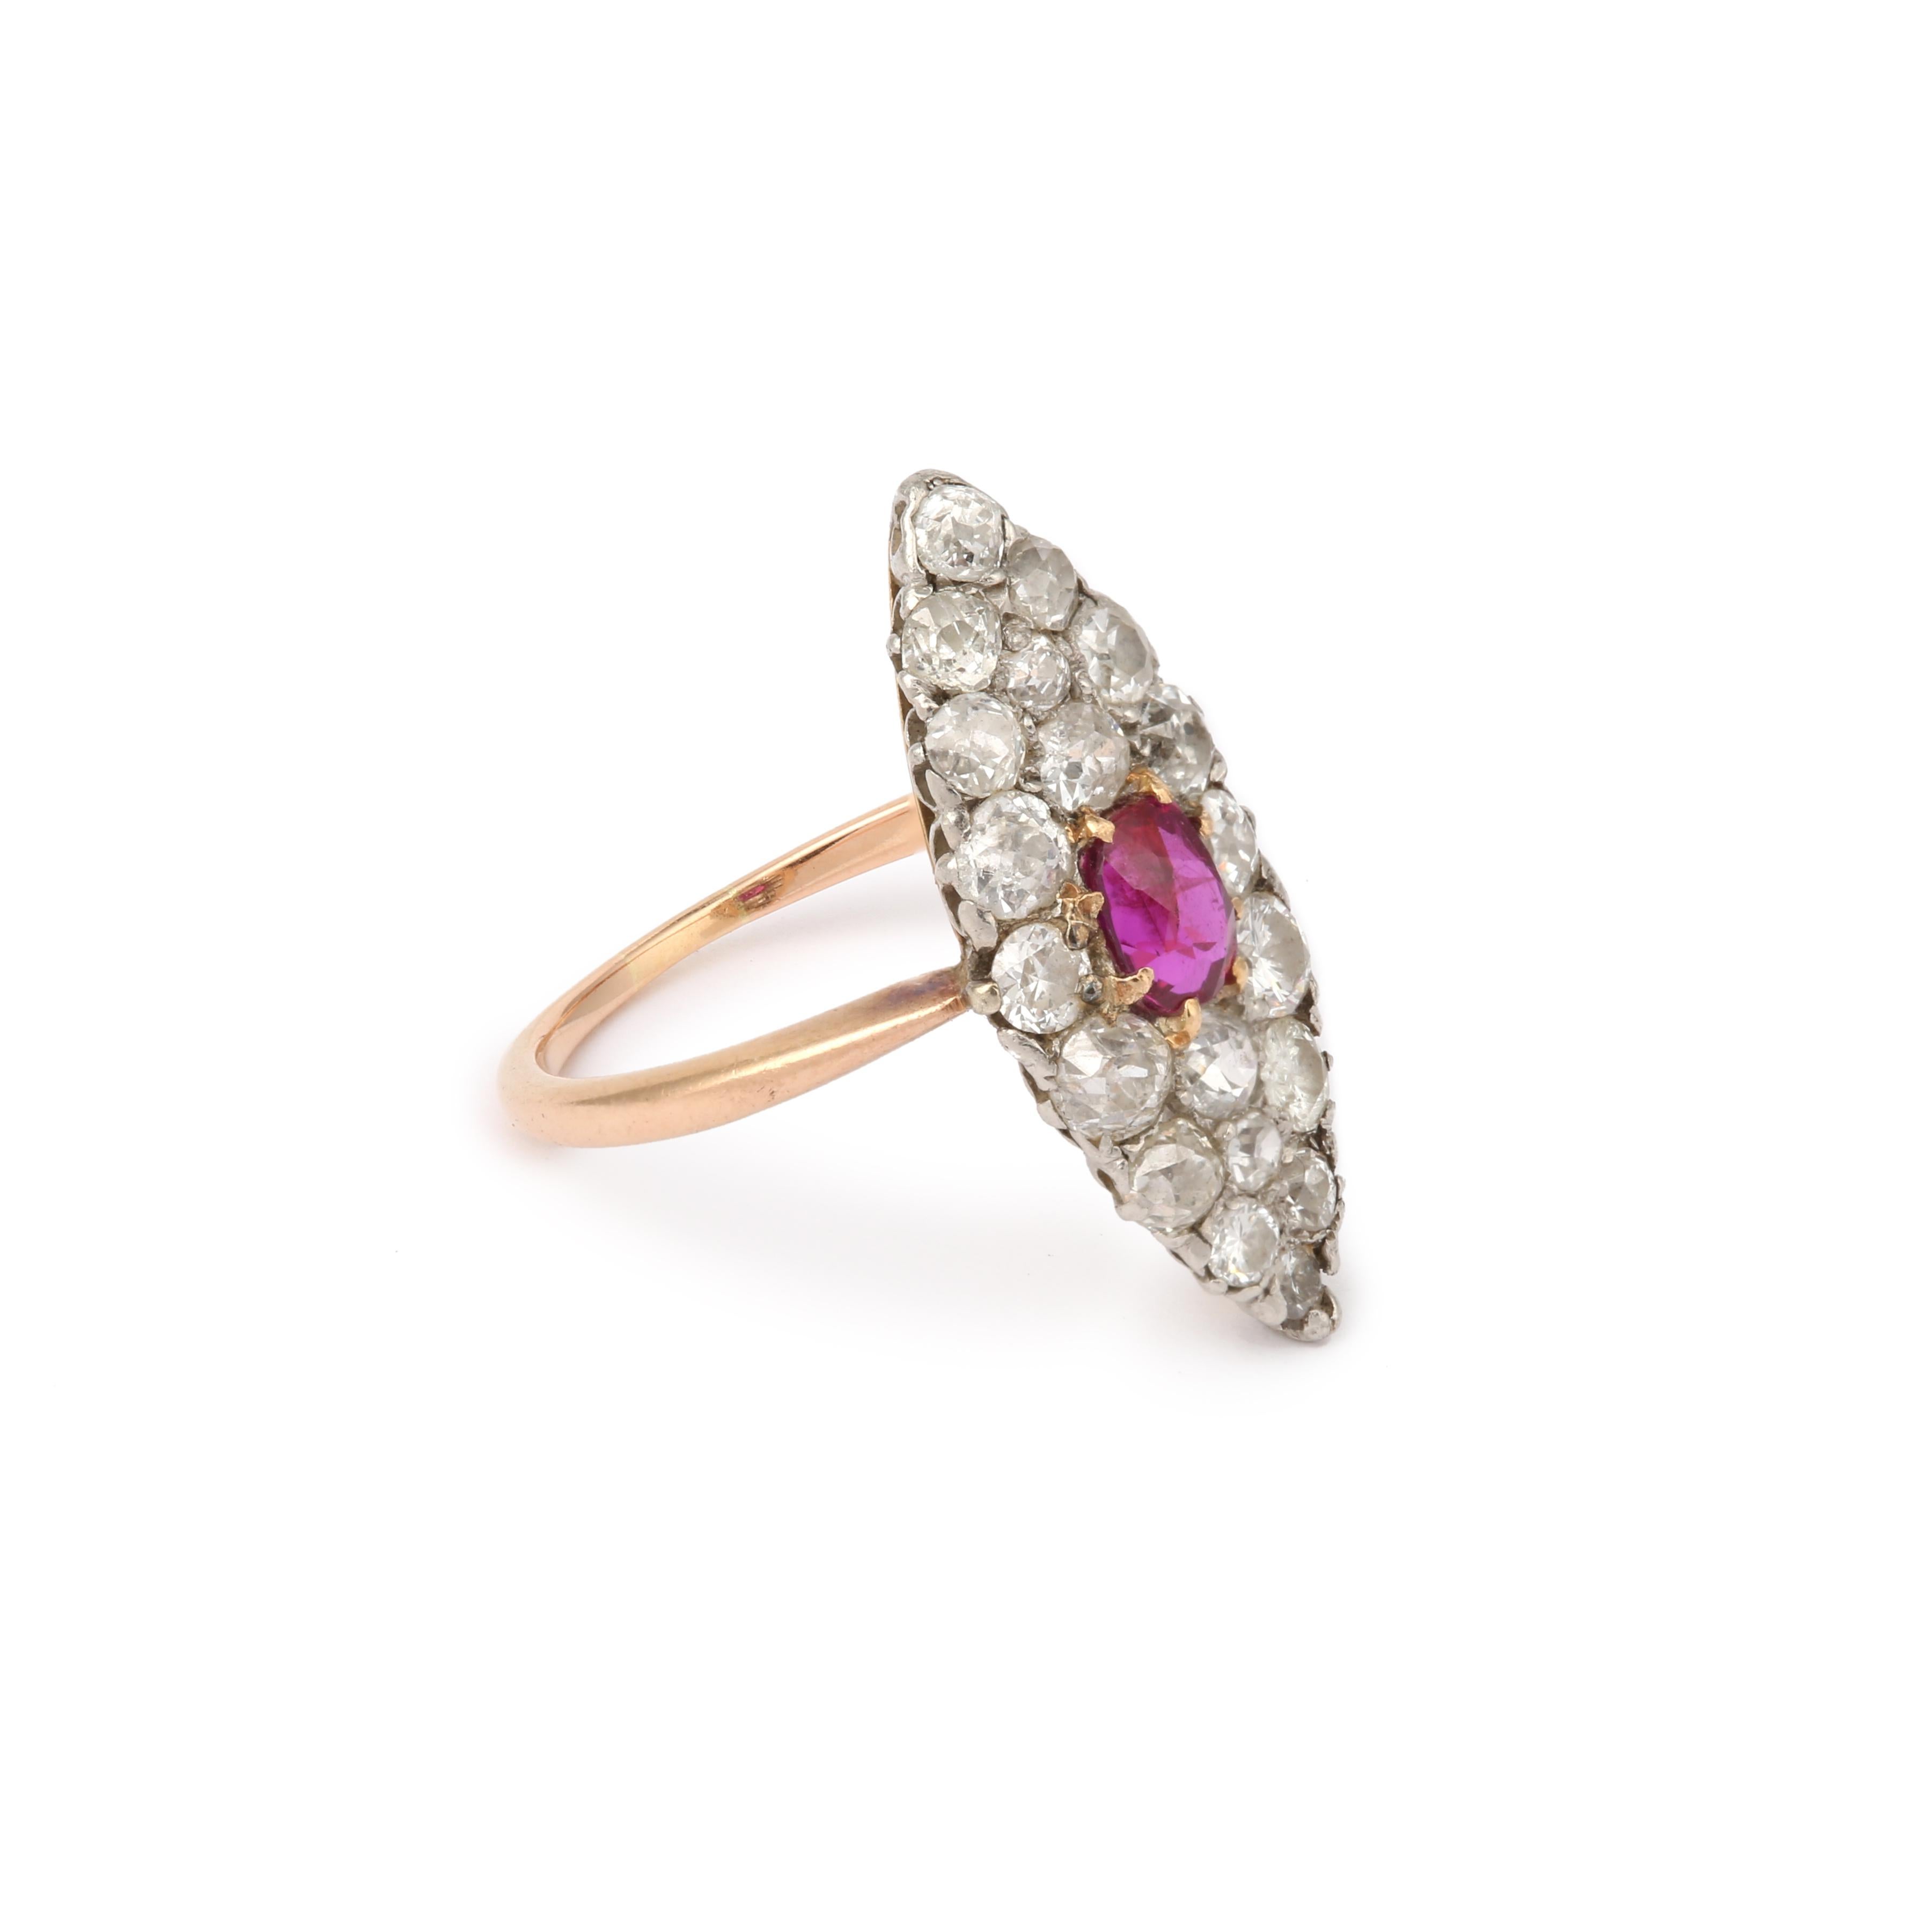 Yellow gold and platinum marquise ring centred by a Burmese ruby and paved with old-cut diamonds.

Estimated weight of ruby : 0.50 carats

Estimated total weight of diamonds: 1.7 carats

Dimensions : 24.09 x 10.63 x 4.68 mm (0.948 x 0.418 x 0.185